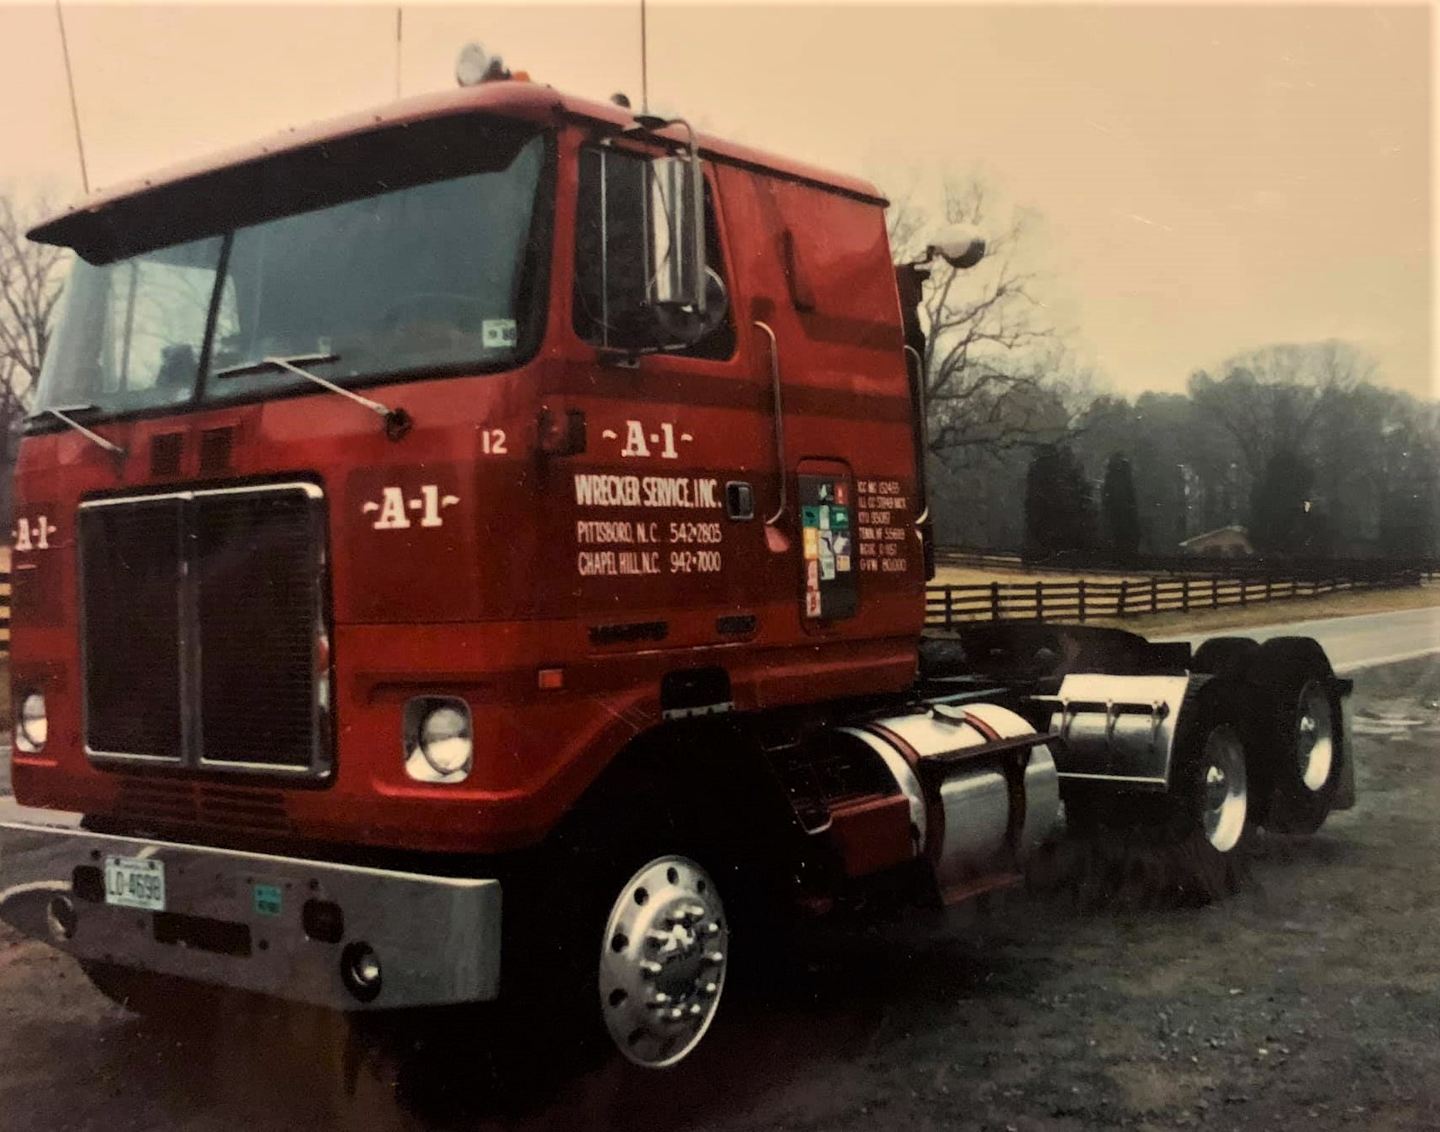 Hewitt's first truck, a 1977 White Road Commander, as it looked by the time he sold it some years after he bought it to owner-operator T.C. Hudson.